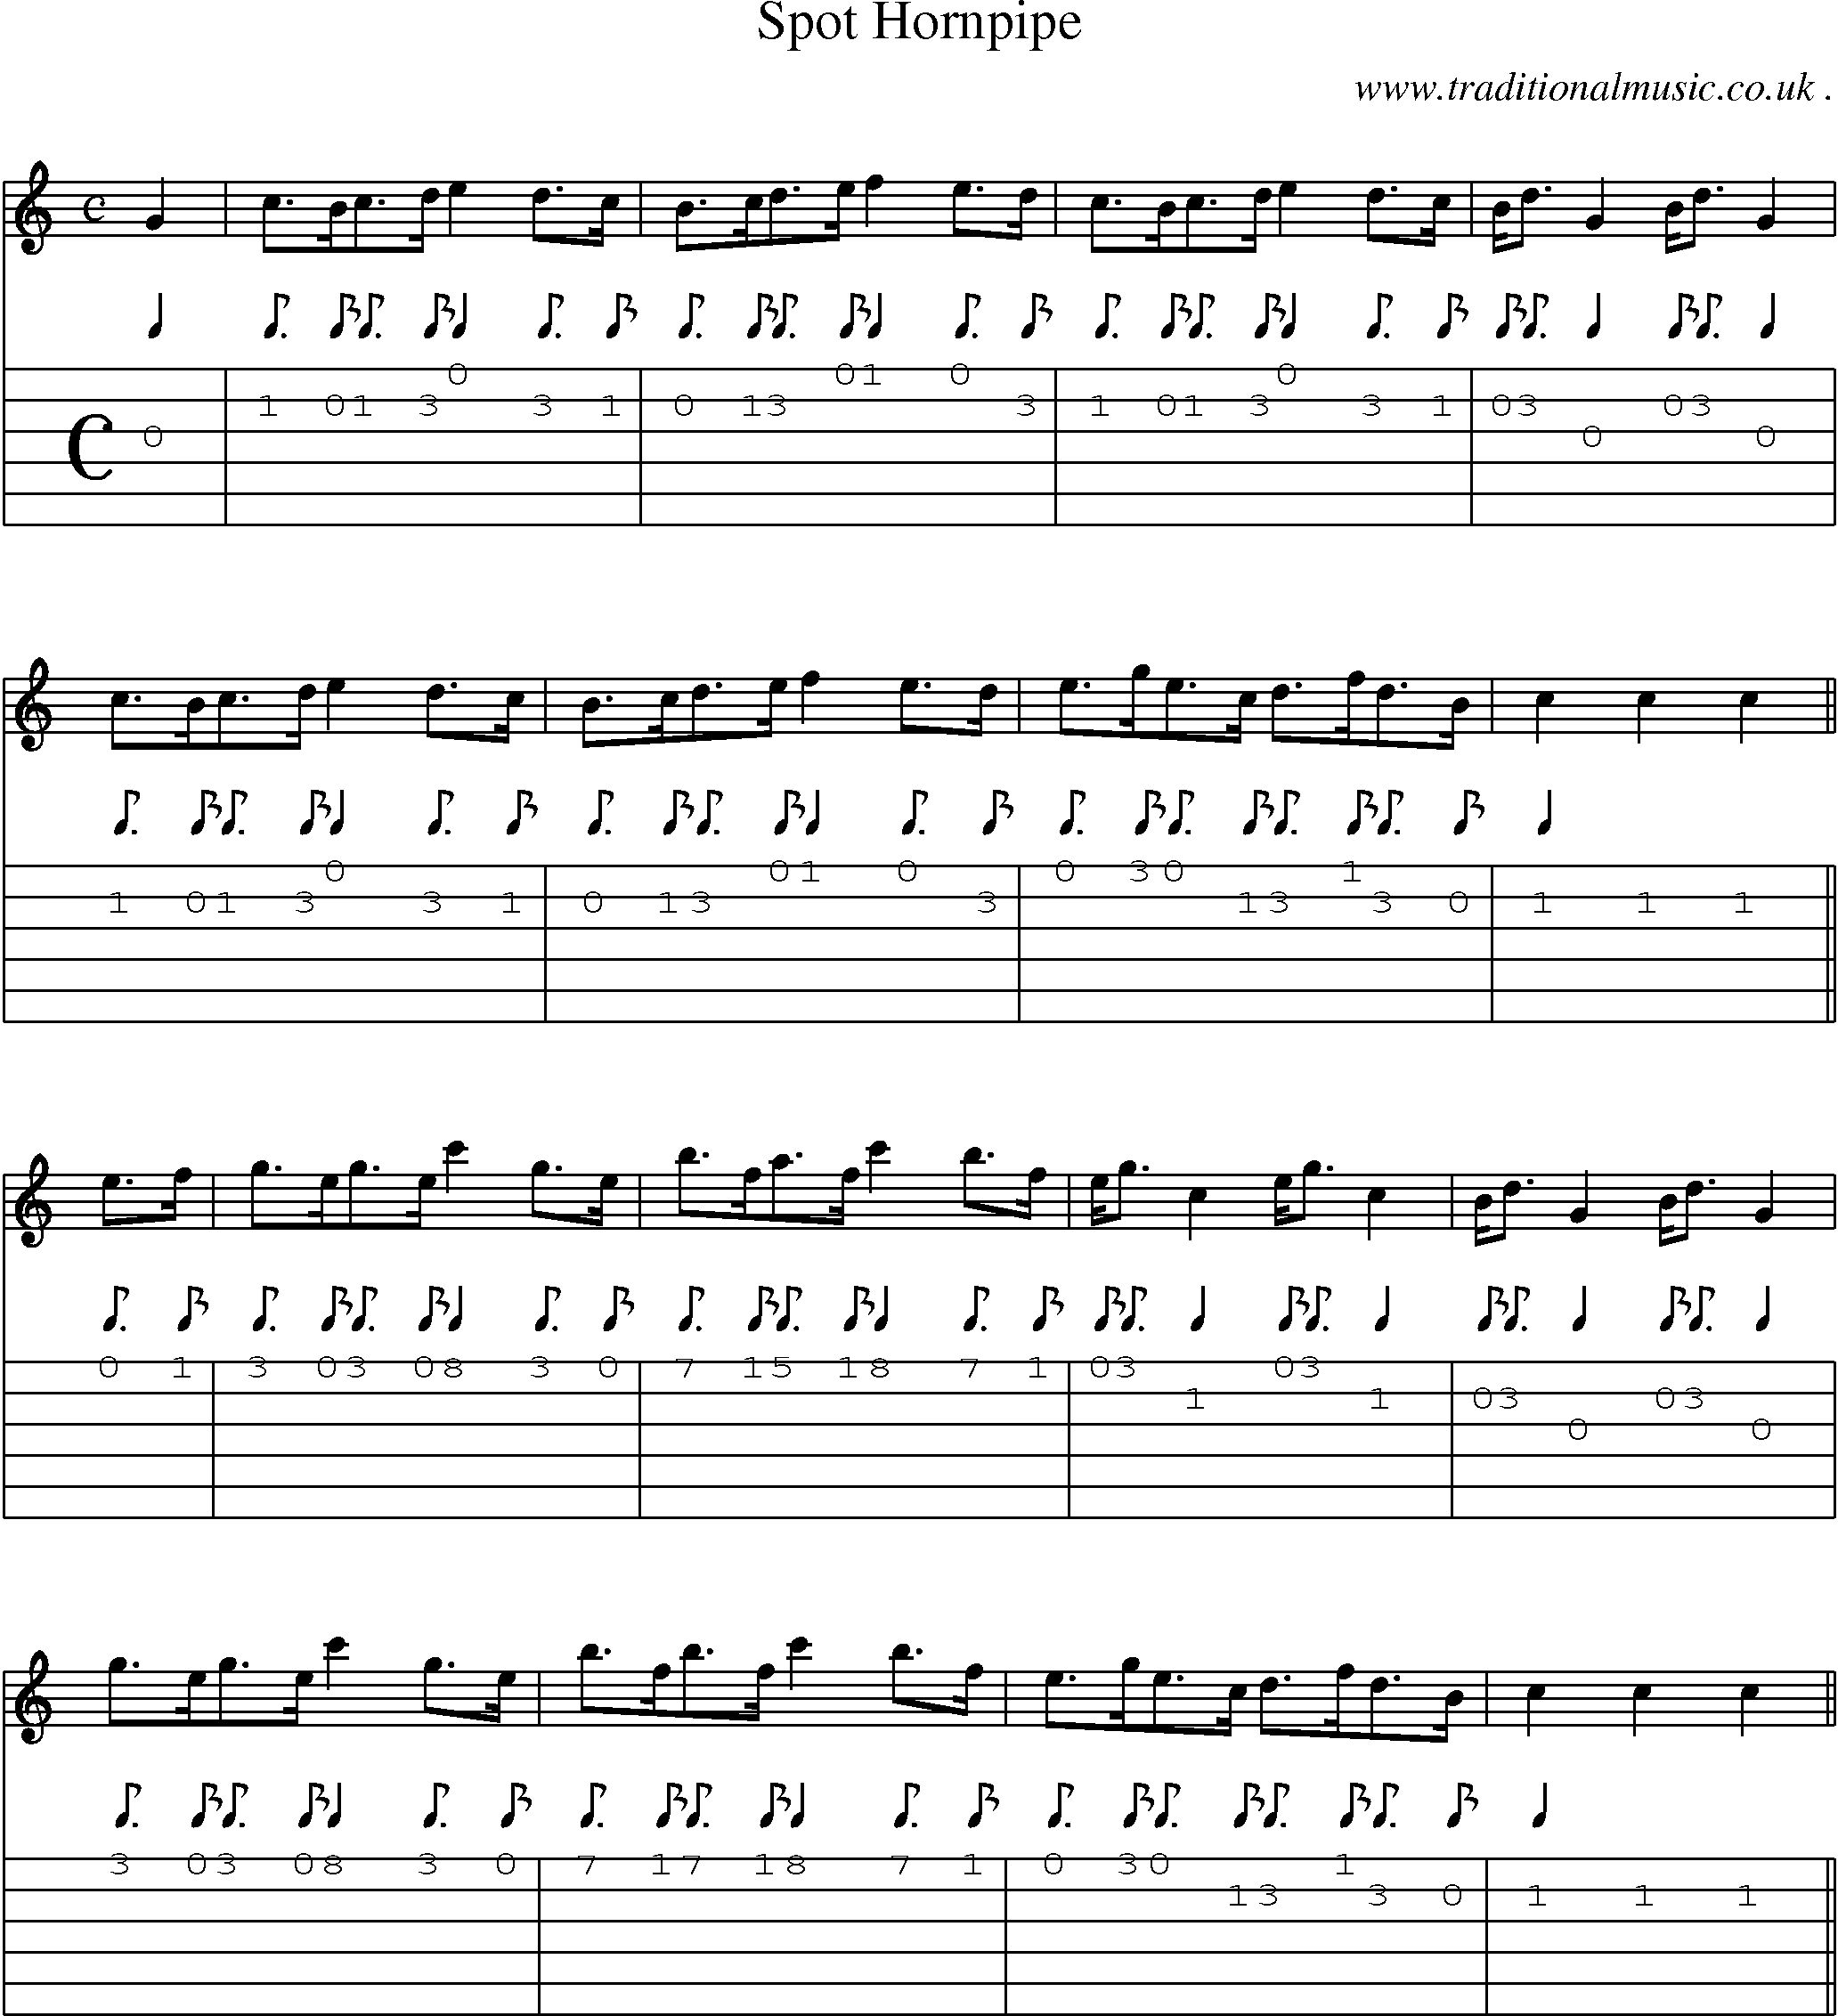 Sheet-Music and Guitar Tabs for Spot Hornpipe